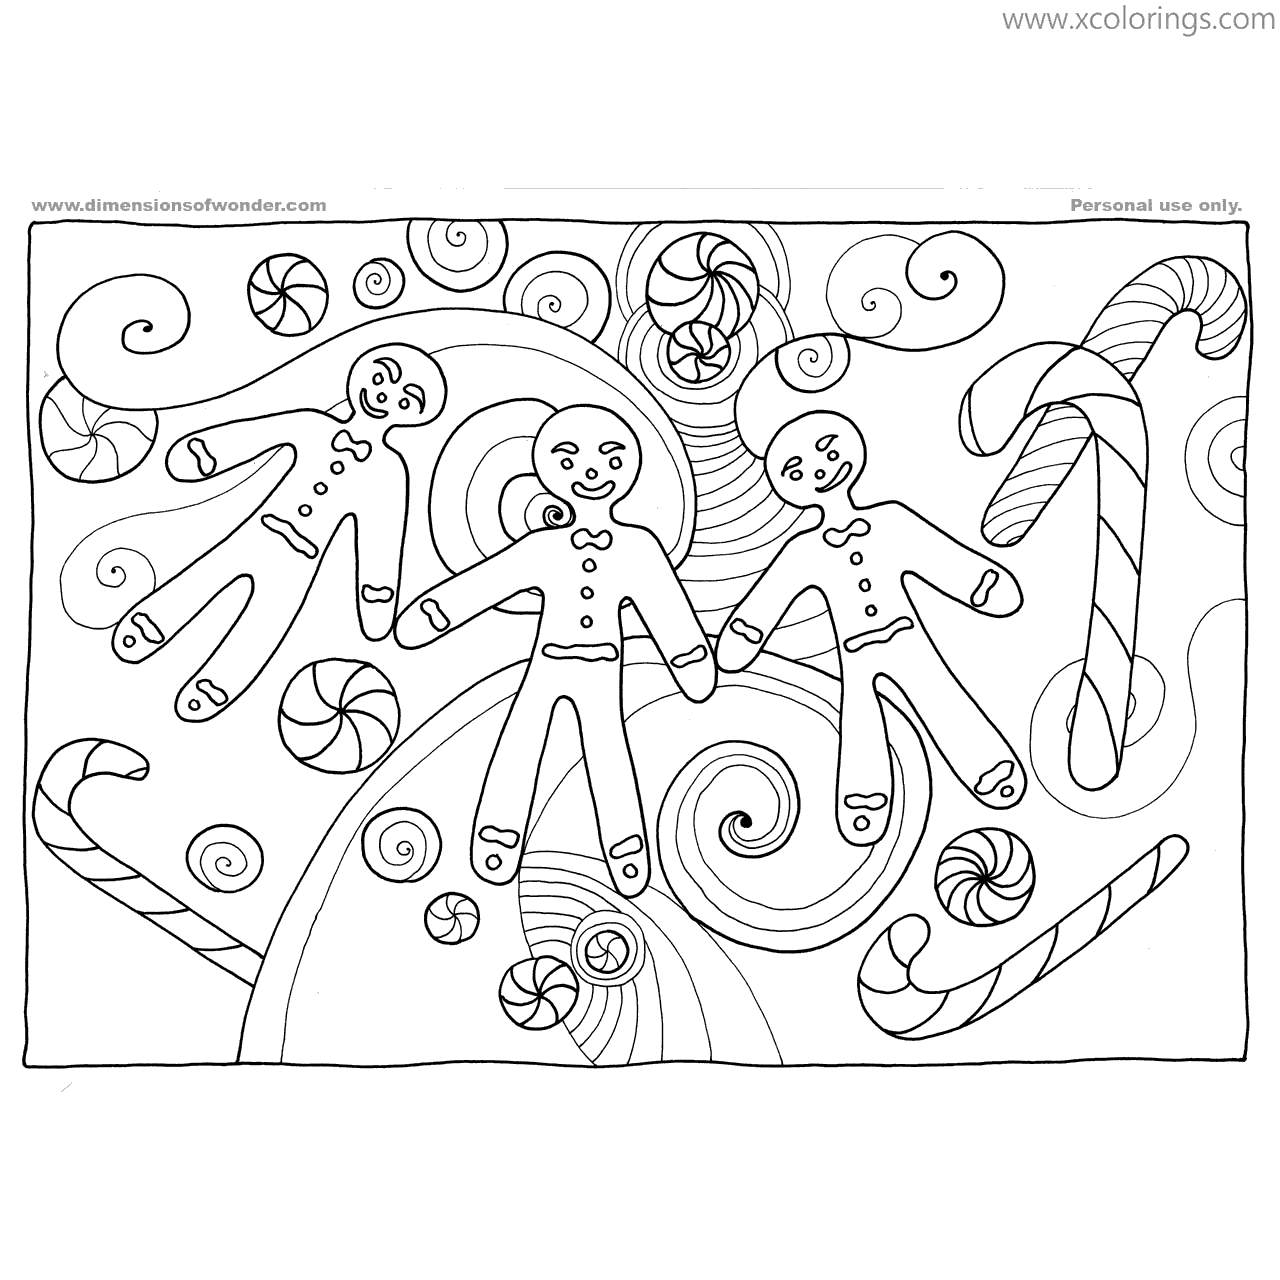 Gingerbread Man Doodle Coloring Pages - XColorings.com